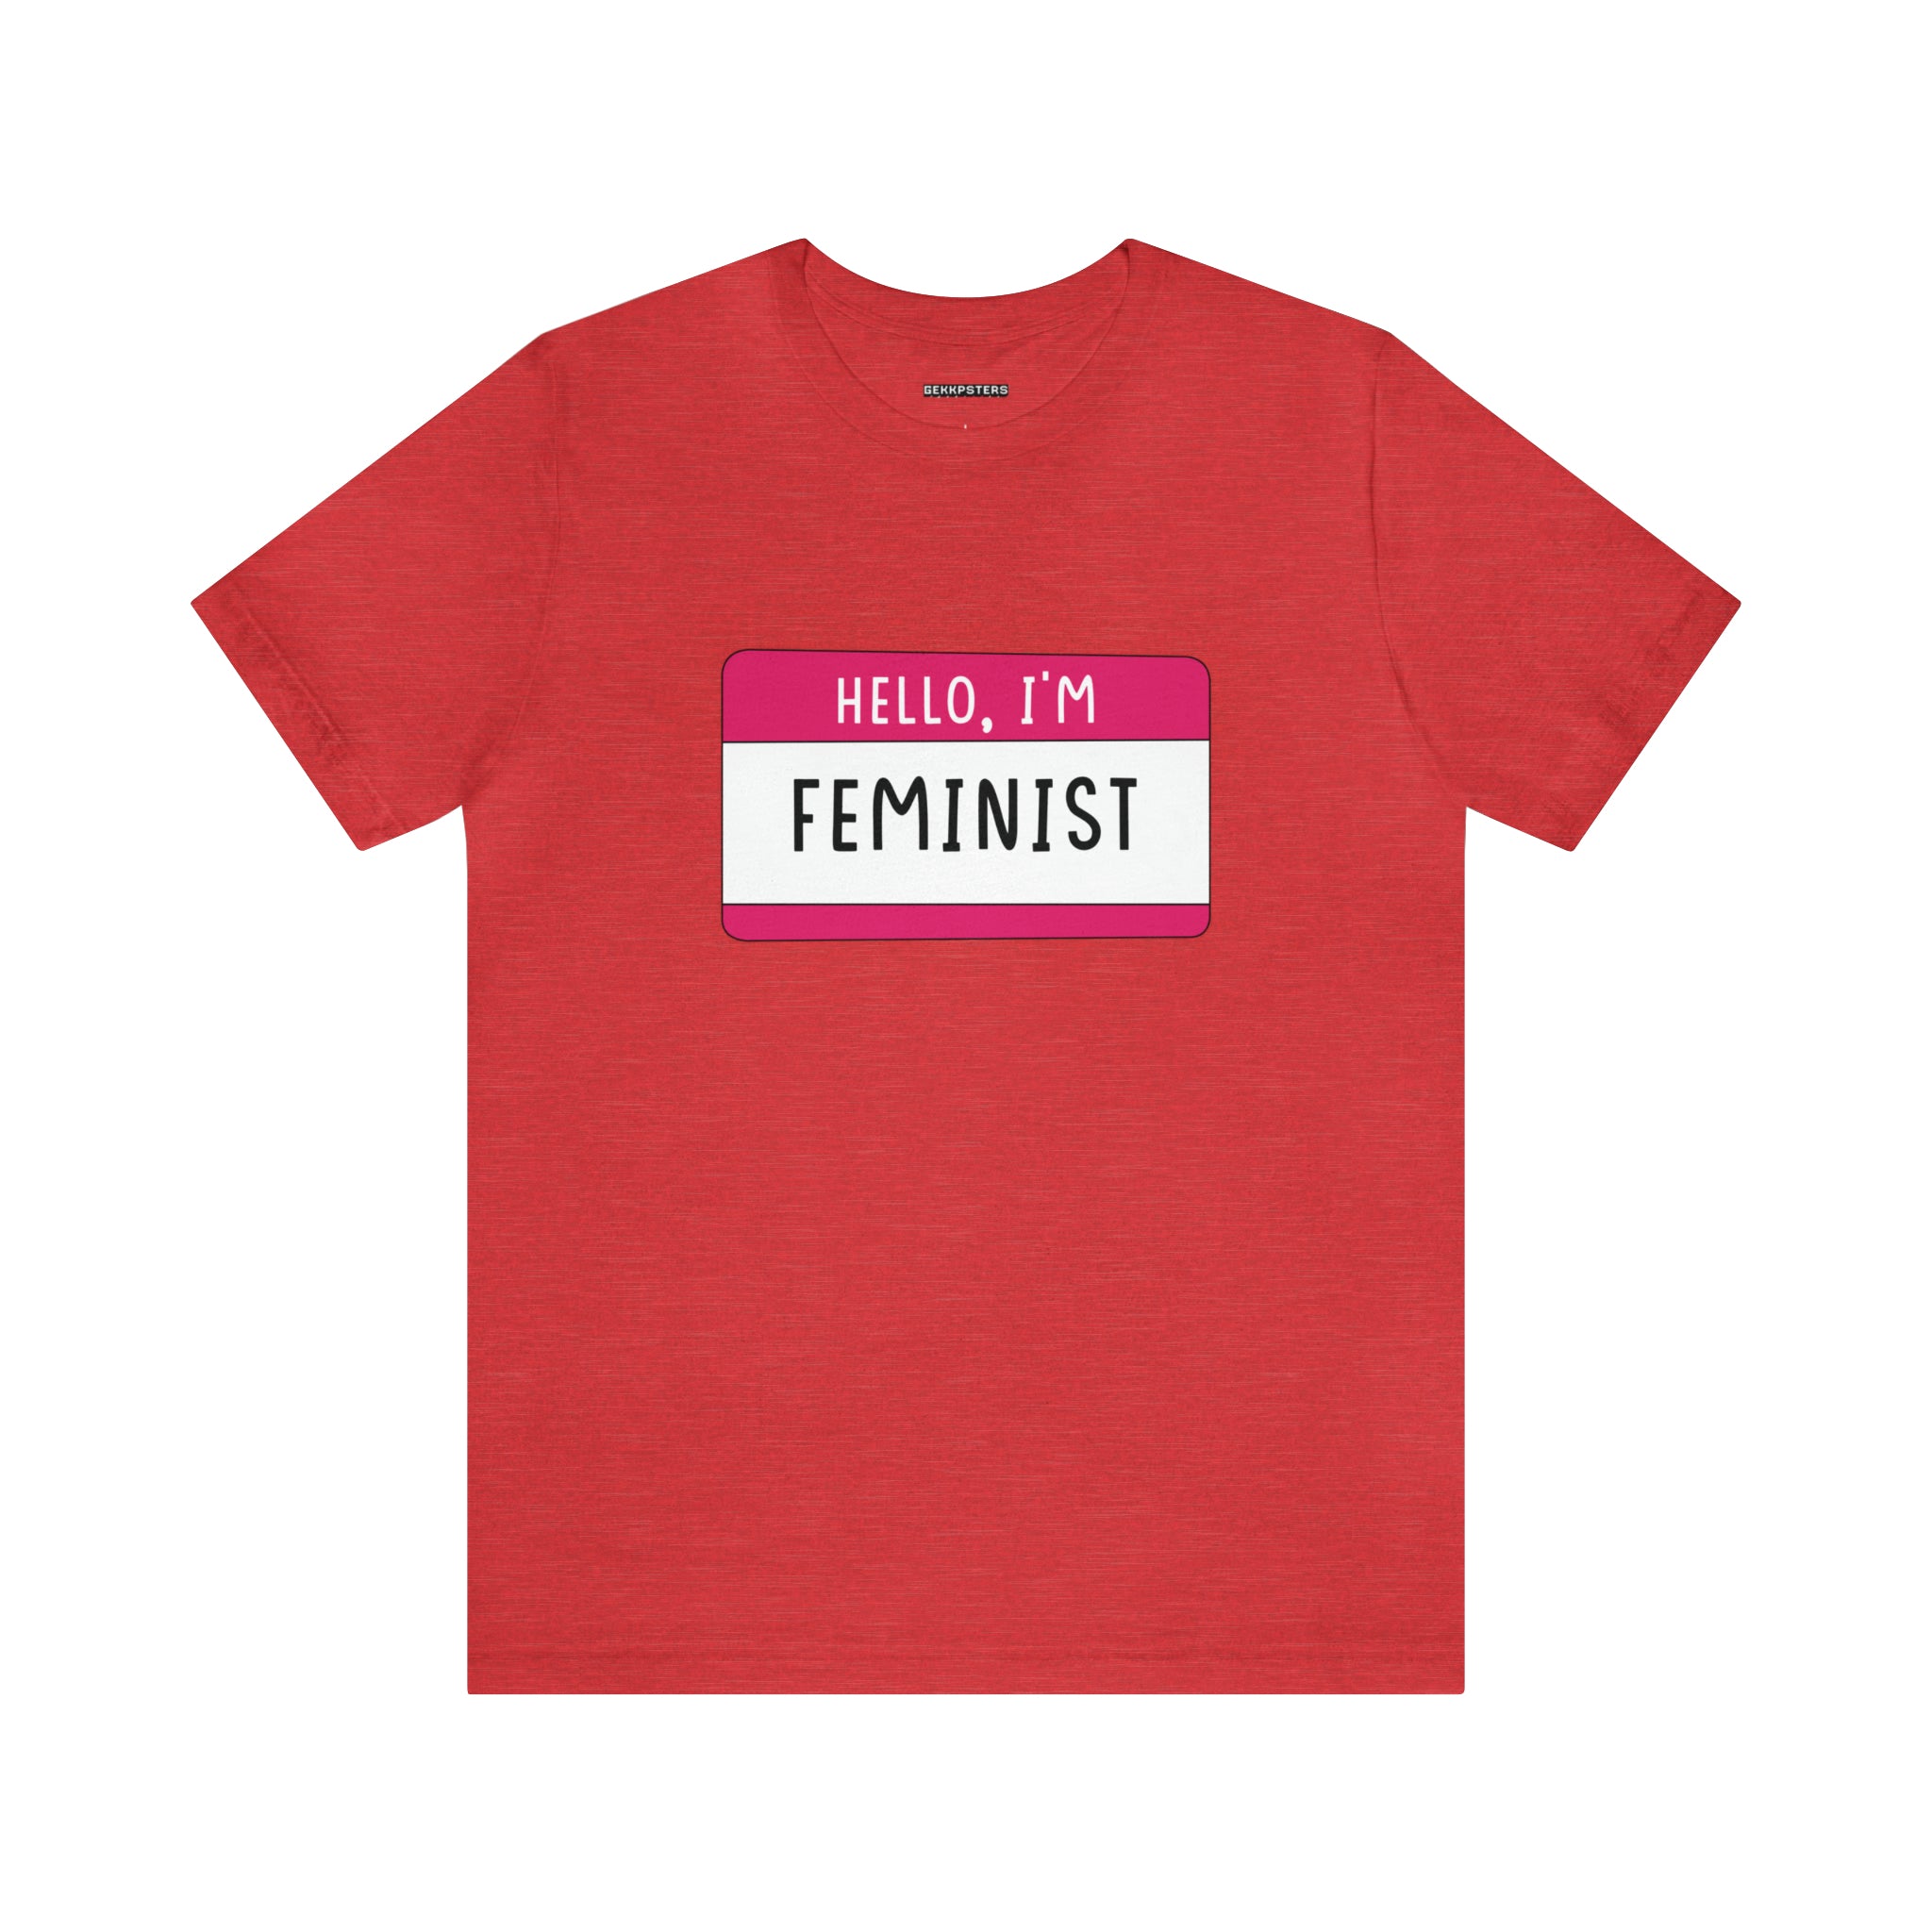 Hello, I'm Feminist T-Shirt with a purple name tag sticker on the chest that reads "hello, I'm feminist" in white and black text, promoting feminism and equality.